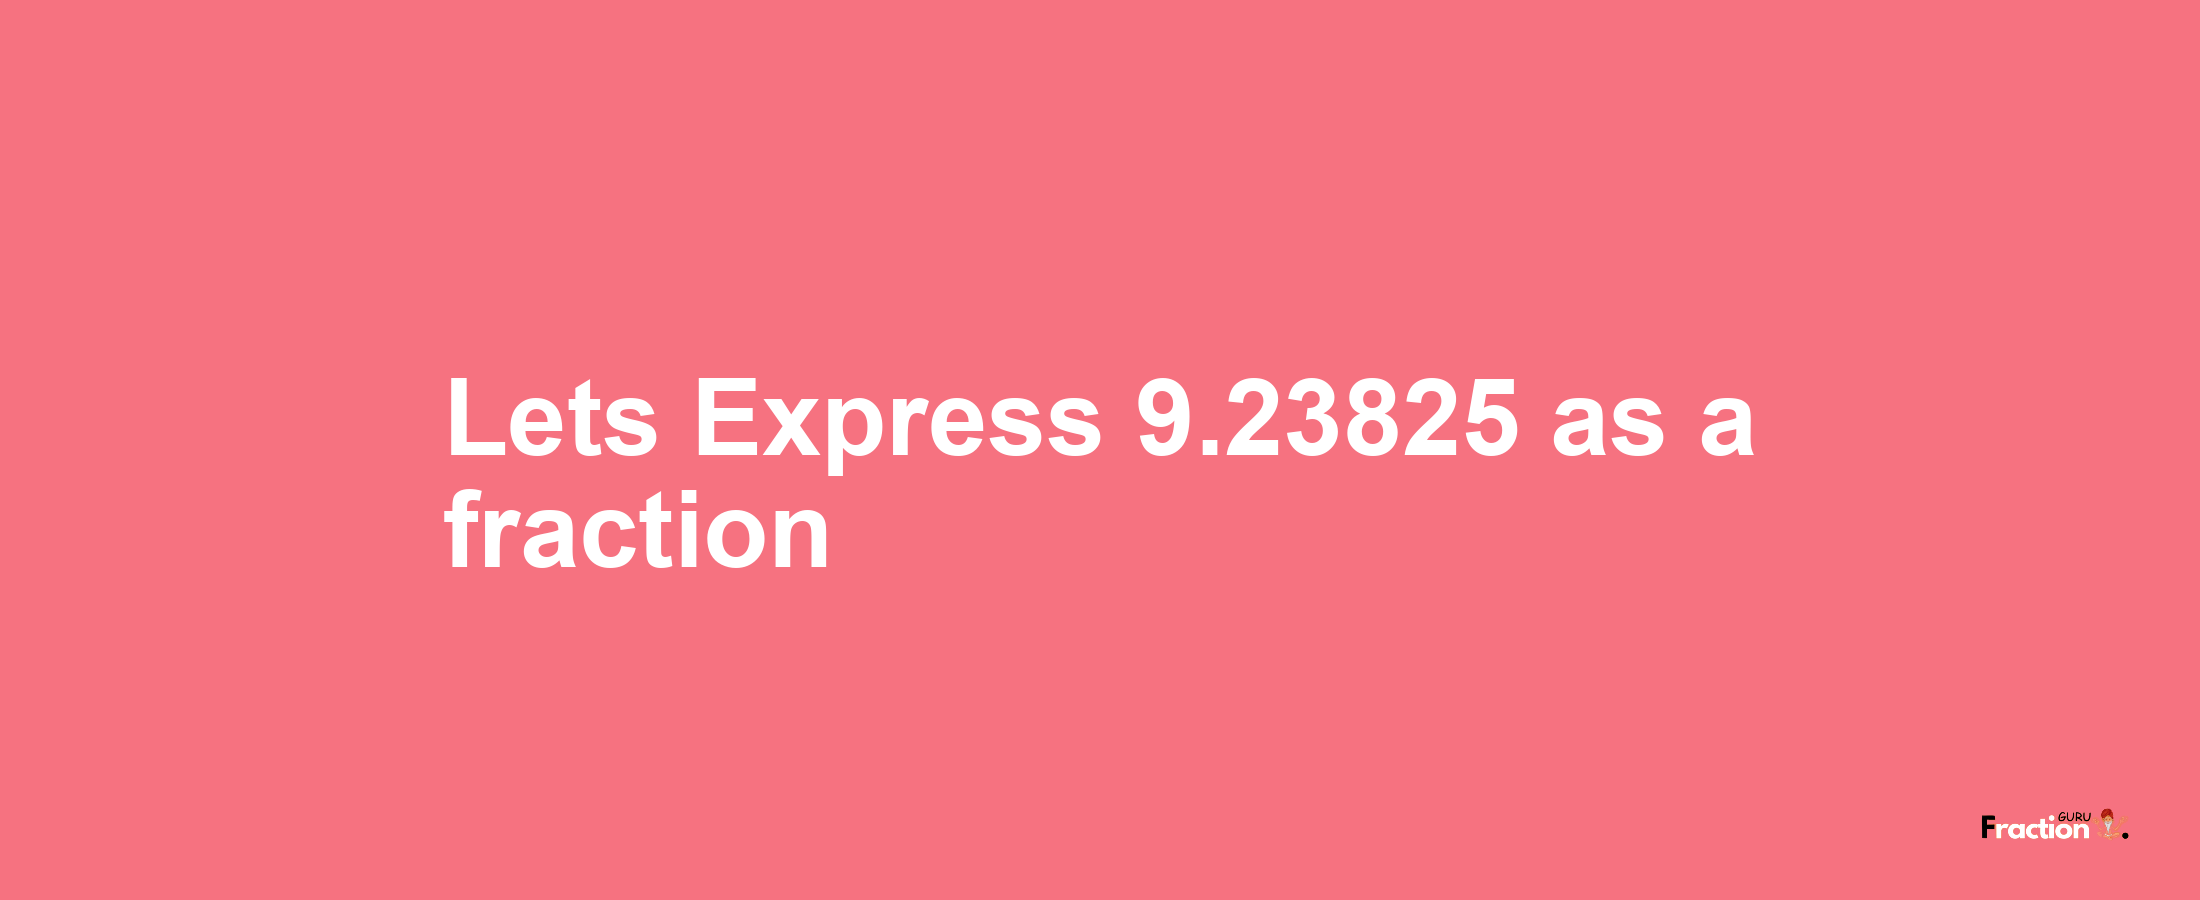 Lets Express 9.23825 as afraction